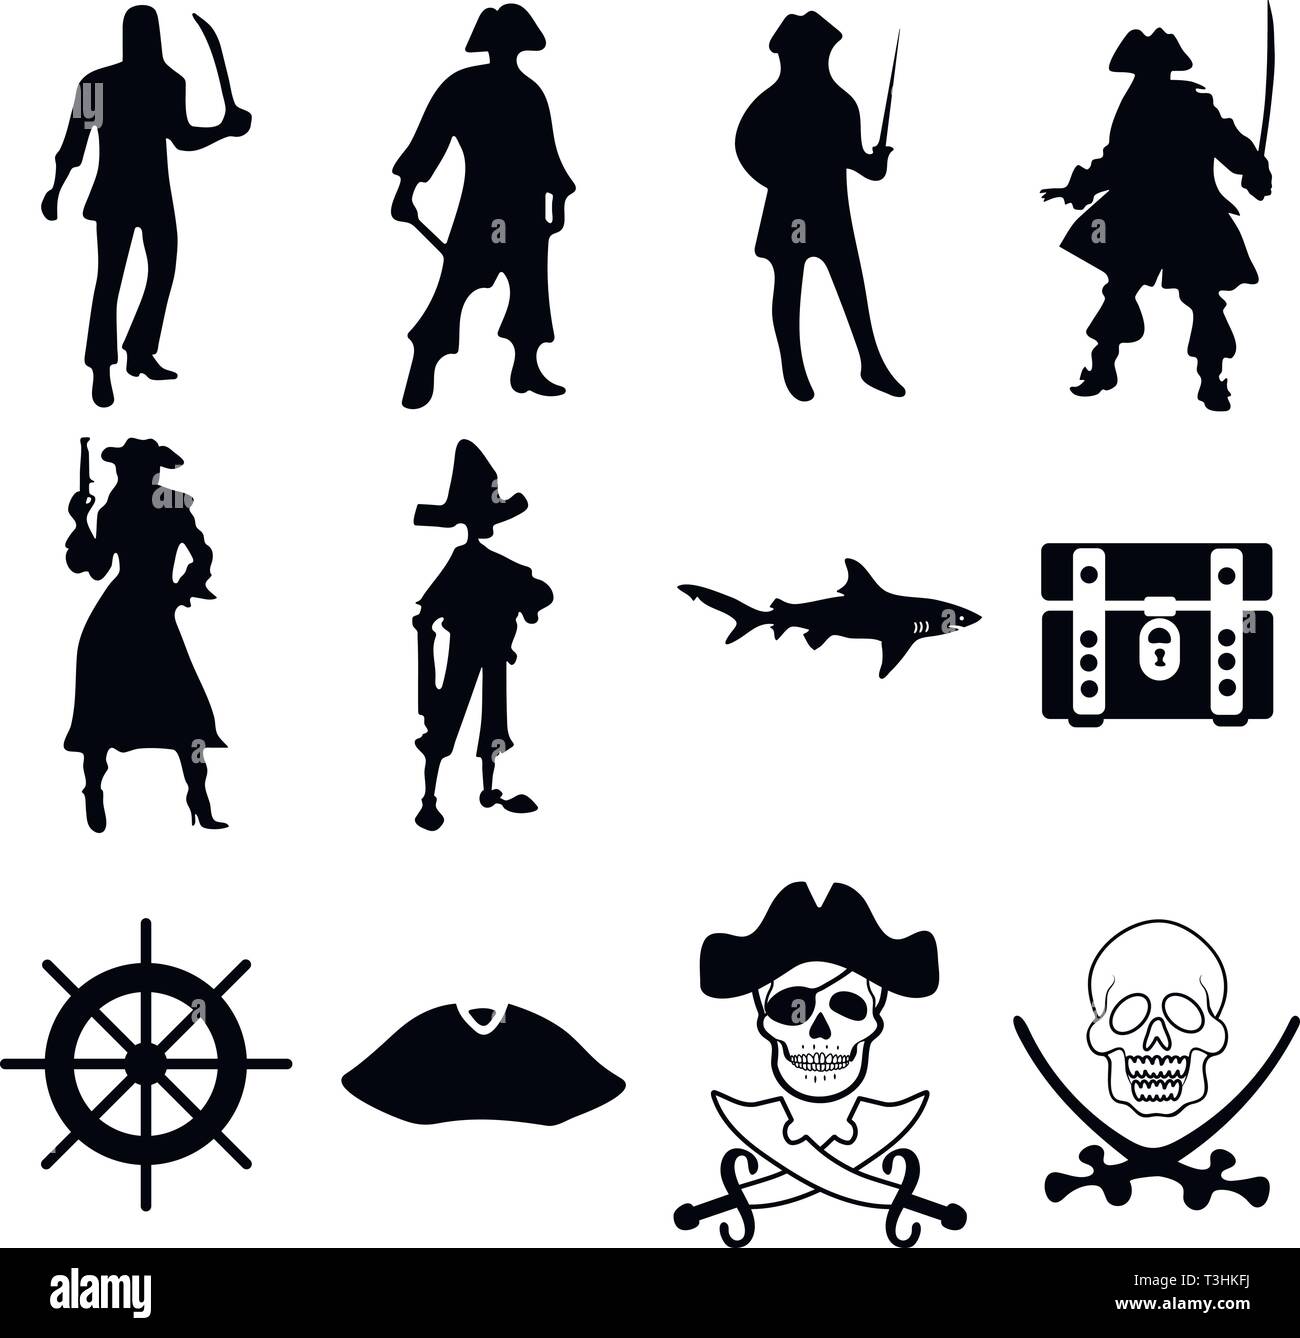 Pirate silhouettes collection Stock Vector